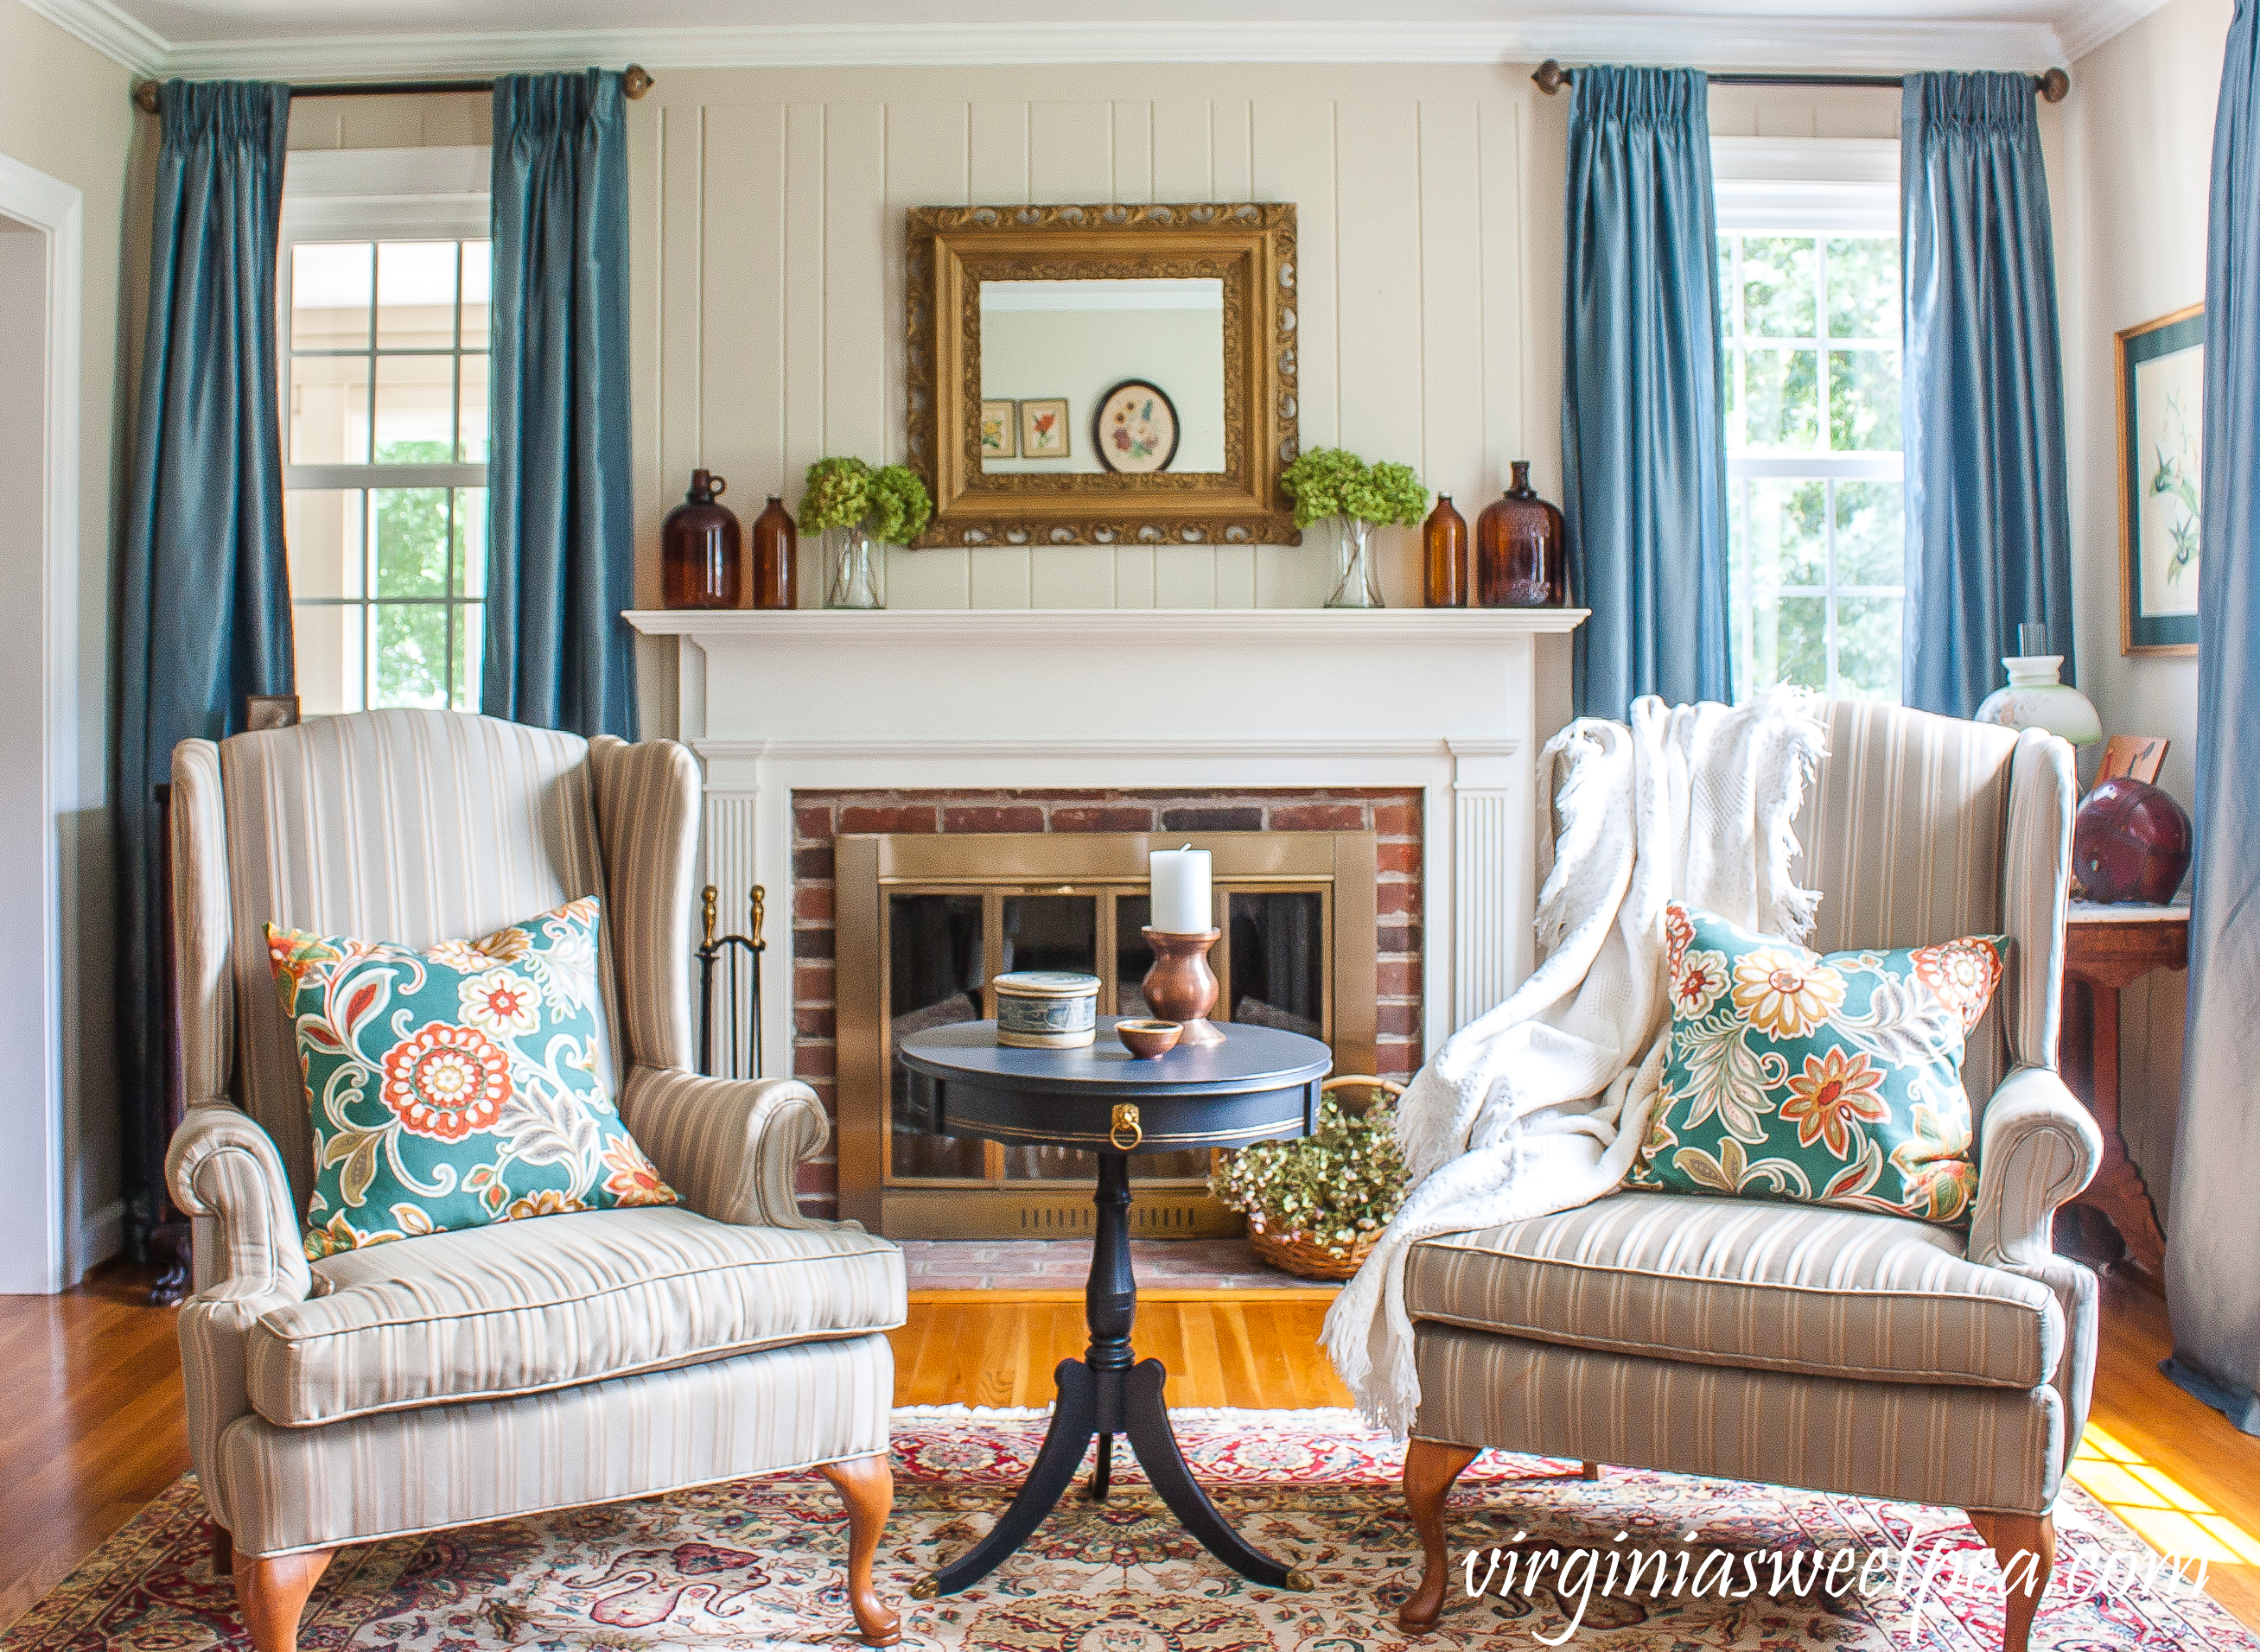 Summer to Fall Transitional Decor Ideas - Sweet Pea